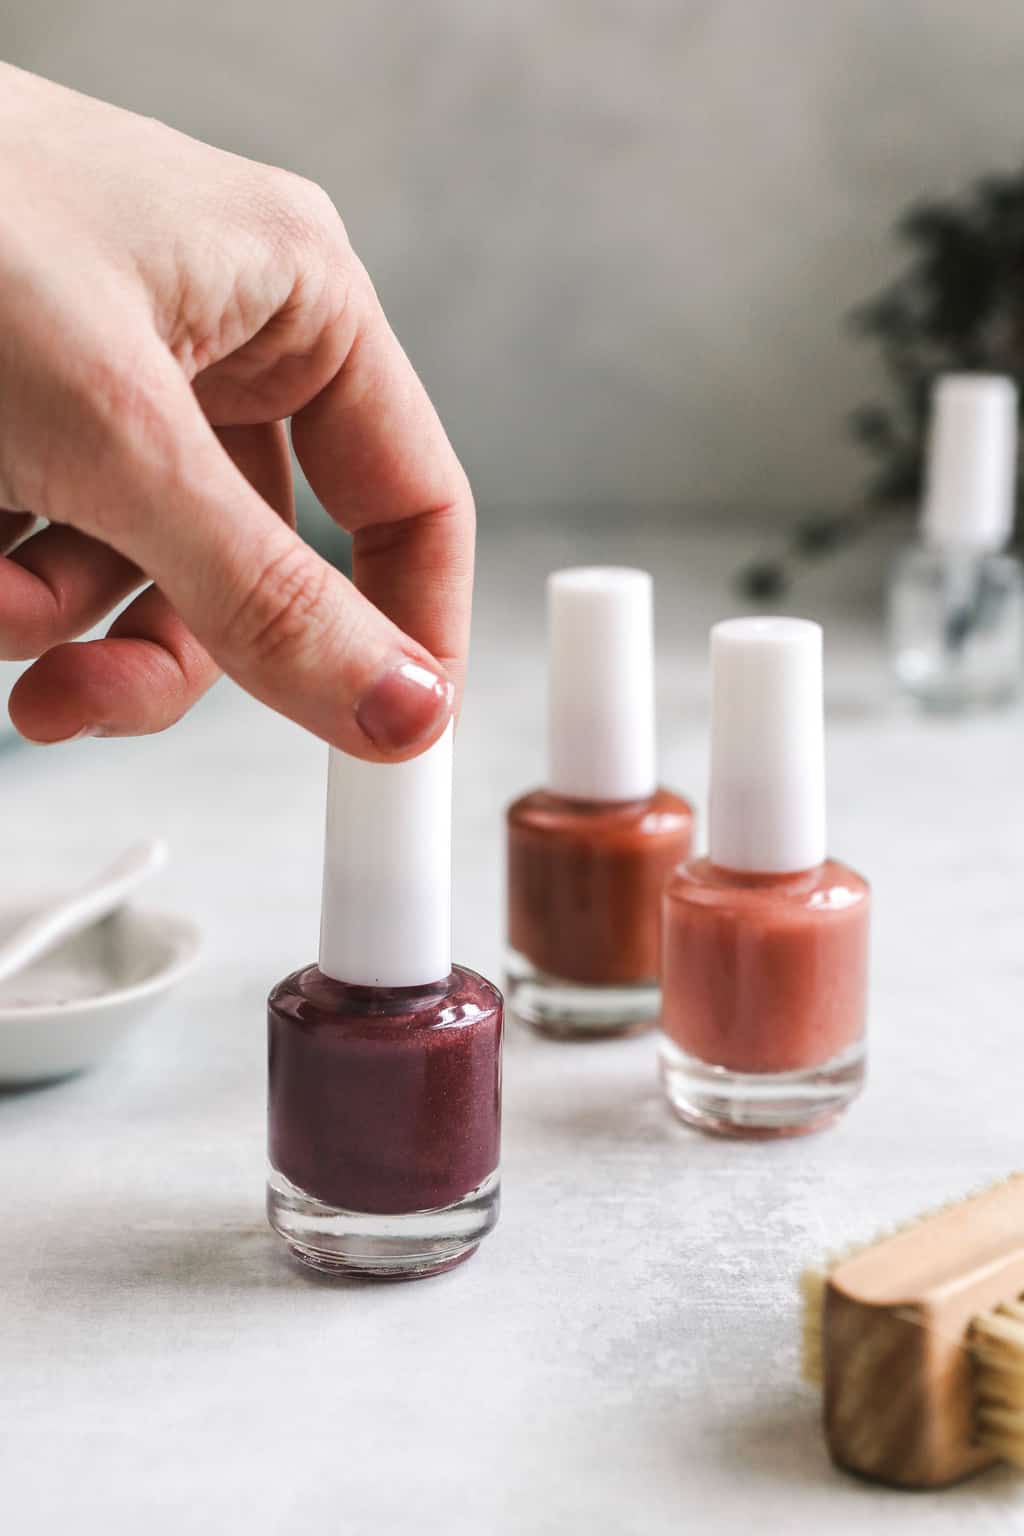 Learn how to make your own nail polish